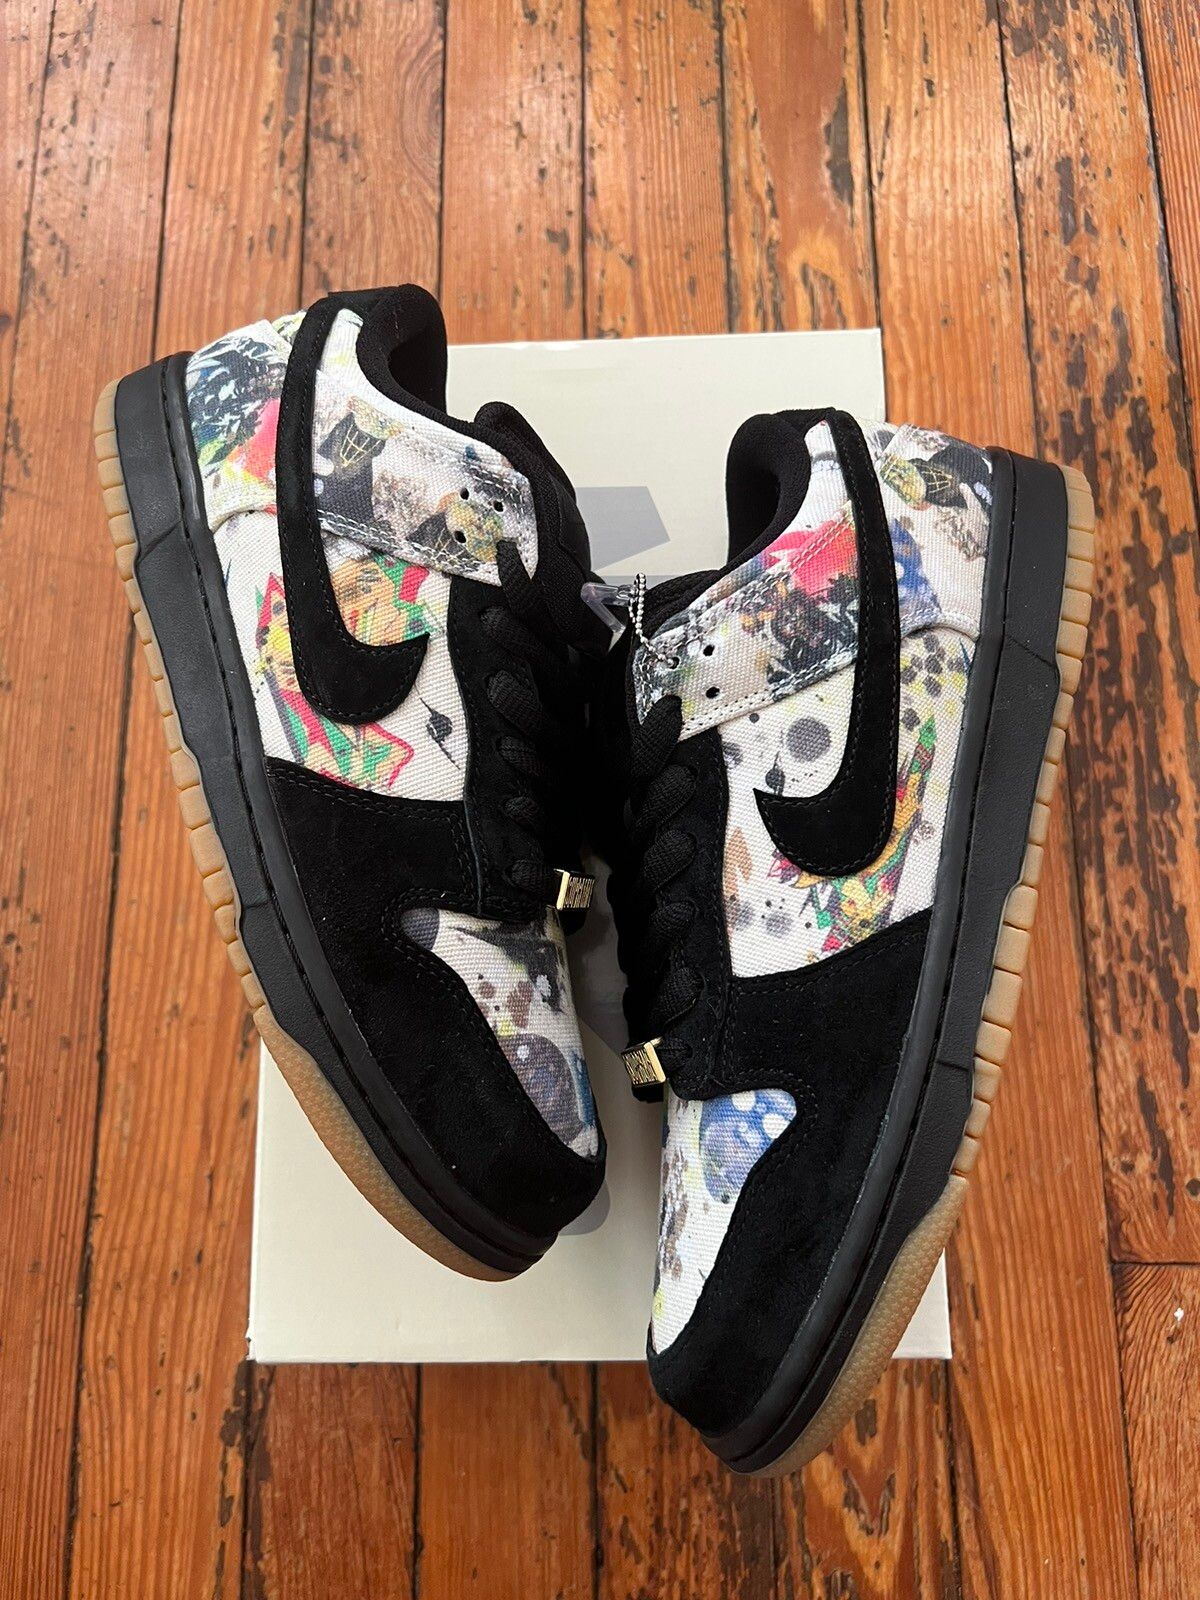 Pre-owned Nike X Supreme Rammellzee Dunk Sb Shoes In Black